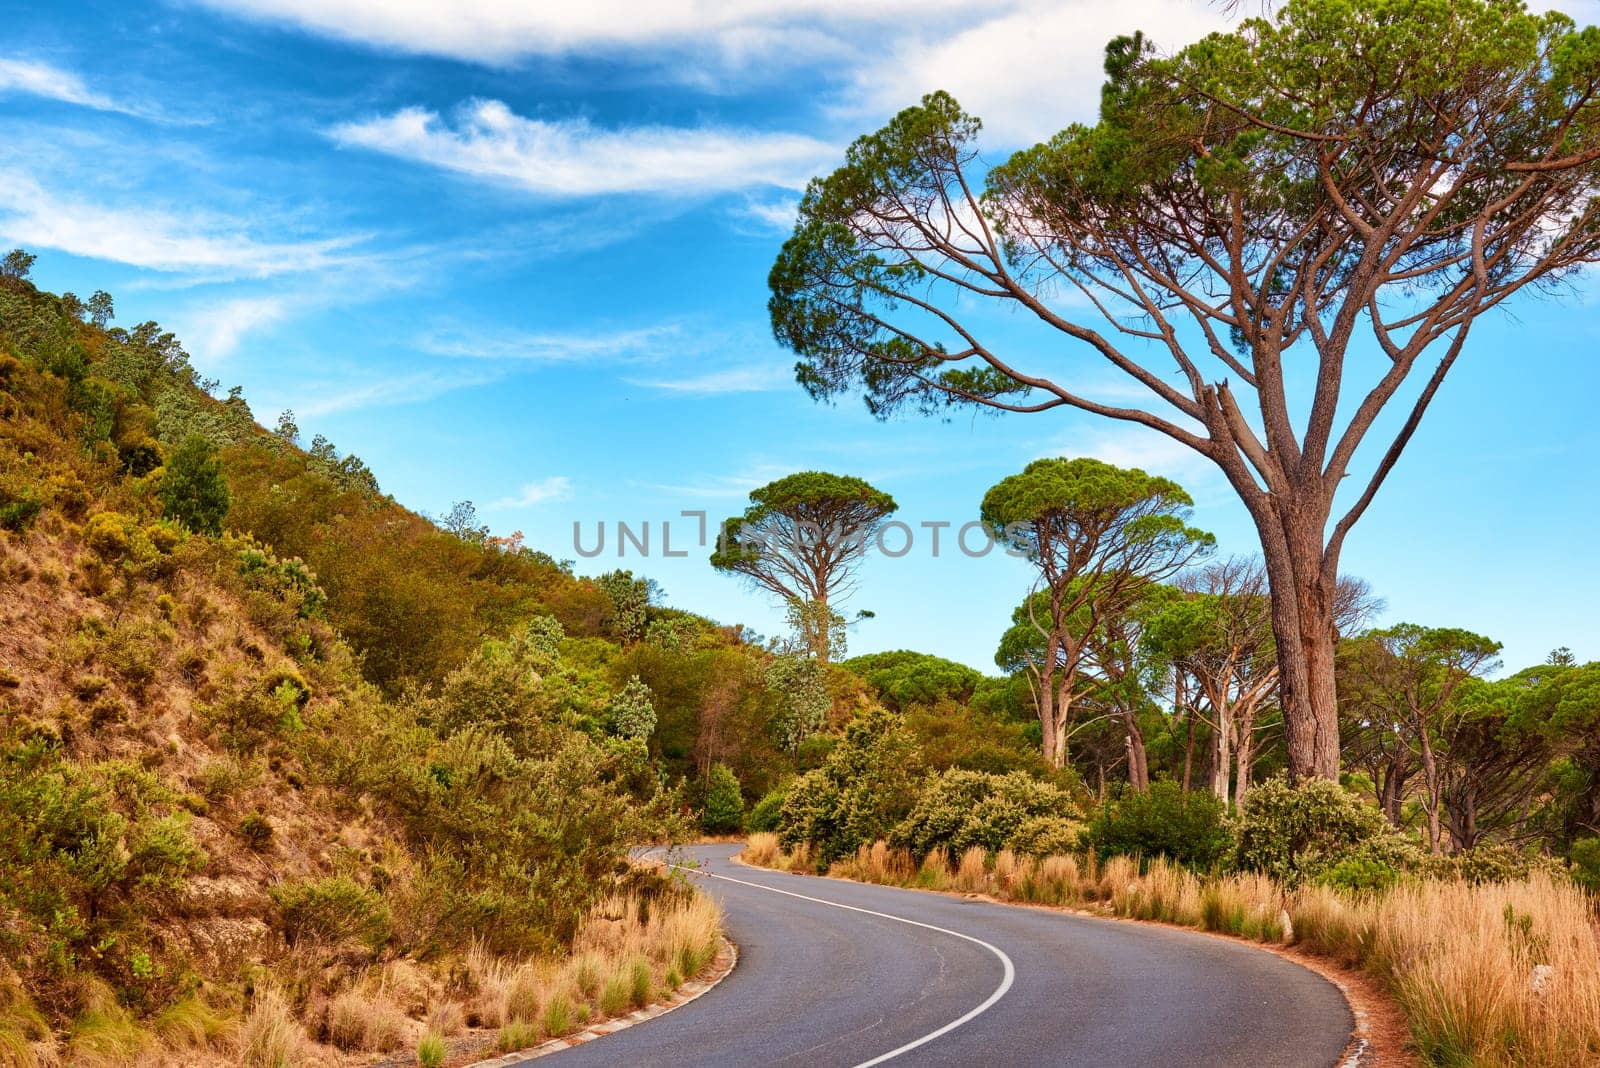 Trees, mountain and road trip travel in nature for journey route with transportation, holiday or summer. Street, hill and foliage in Australia for forest driving or countryside, vacation or blue sky.